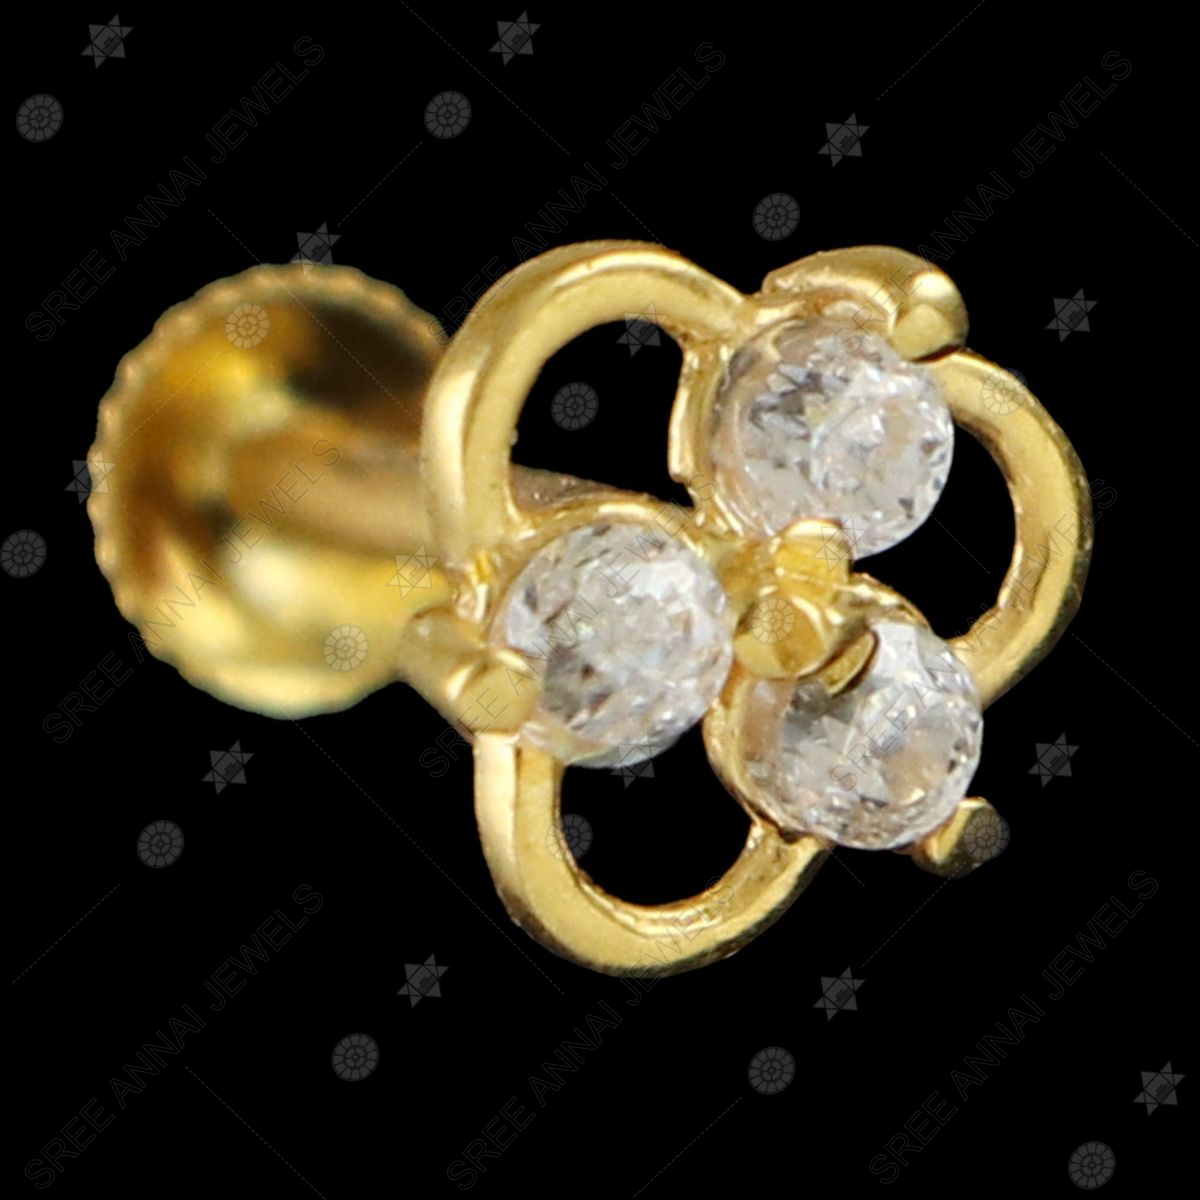 Buy P.C Chandra Jewellers 22KT(916) Yellow Gold Exquisite Chand Bali Drop  Earrings With Meenakari Floral Work at Amazon.in